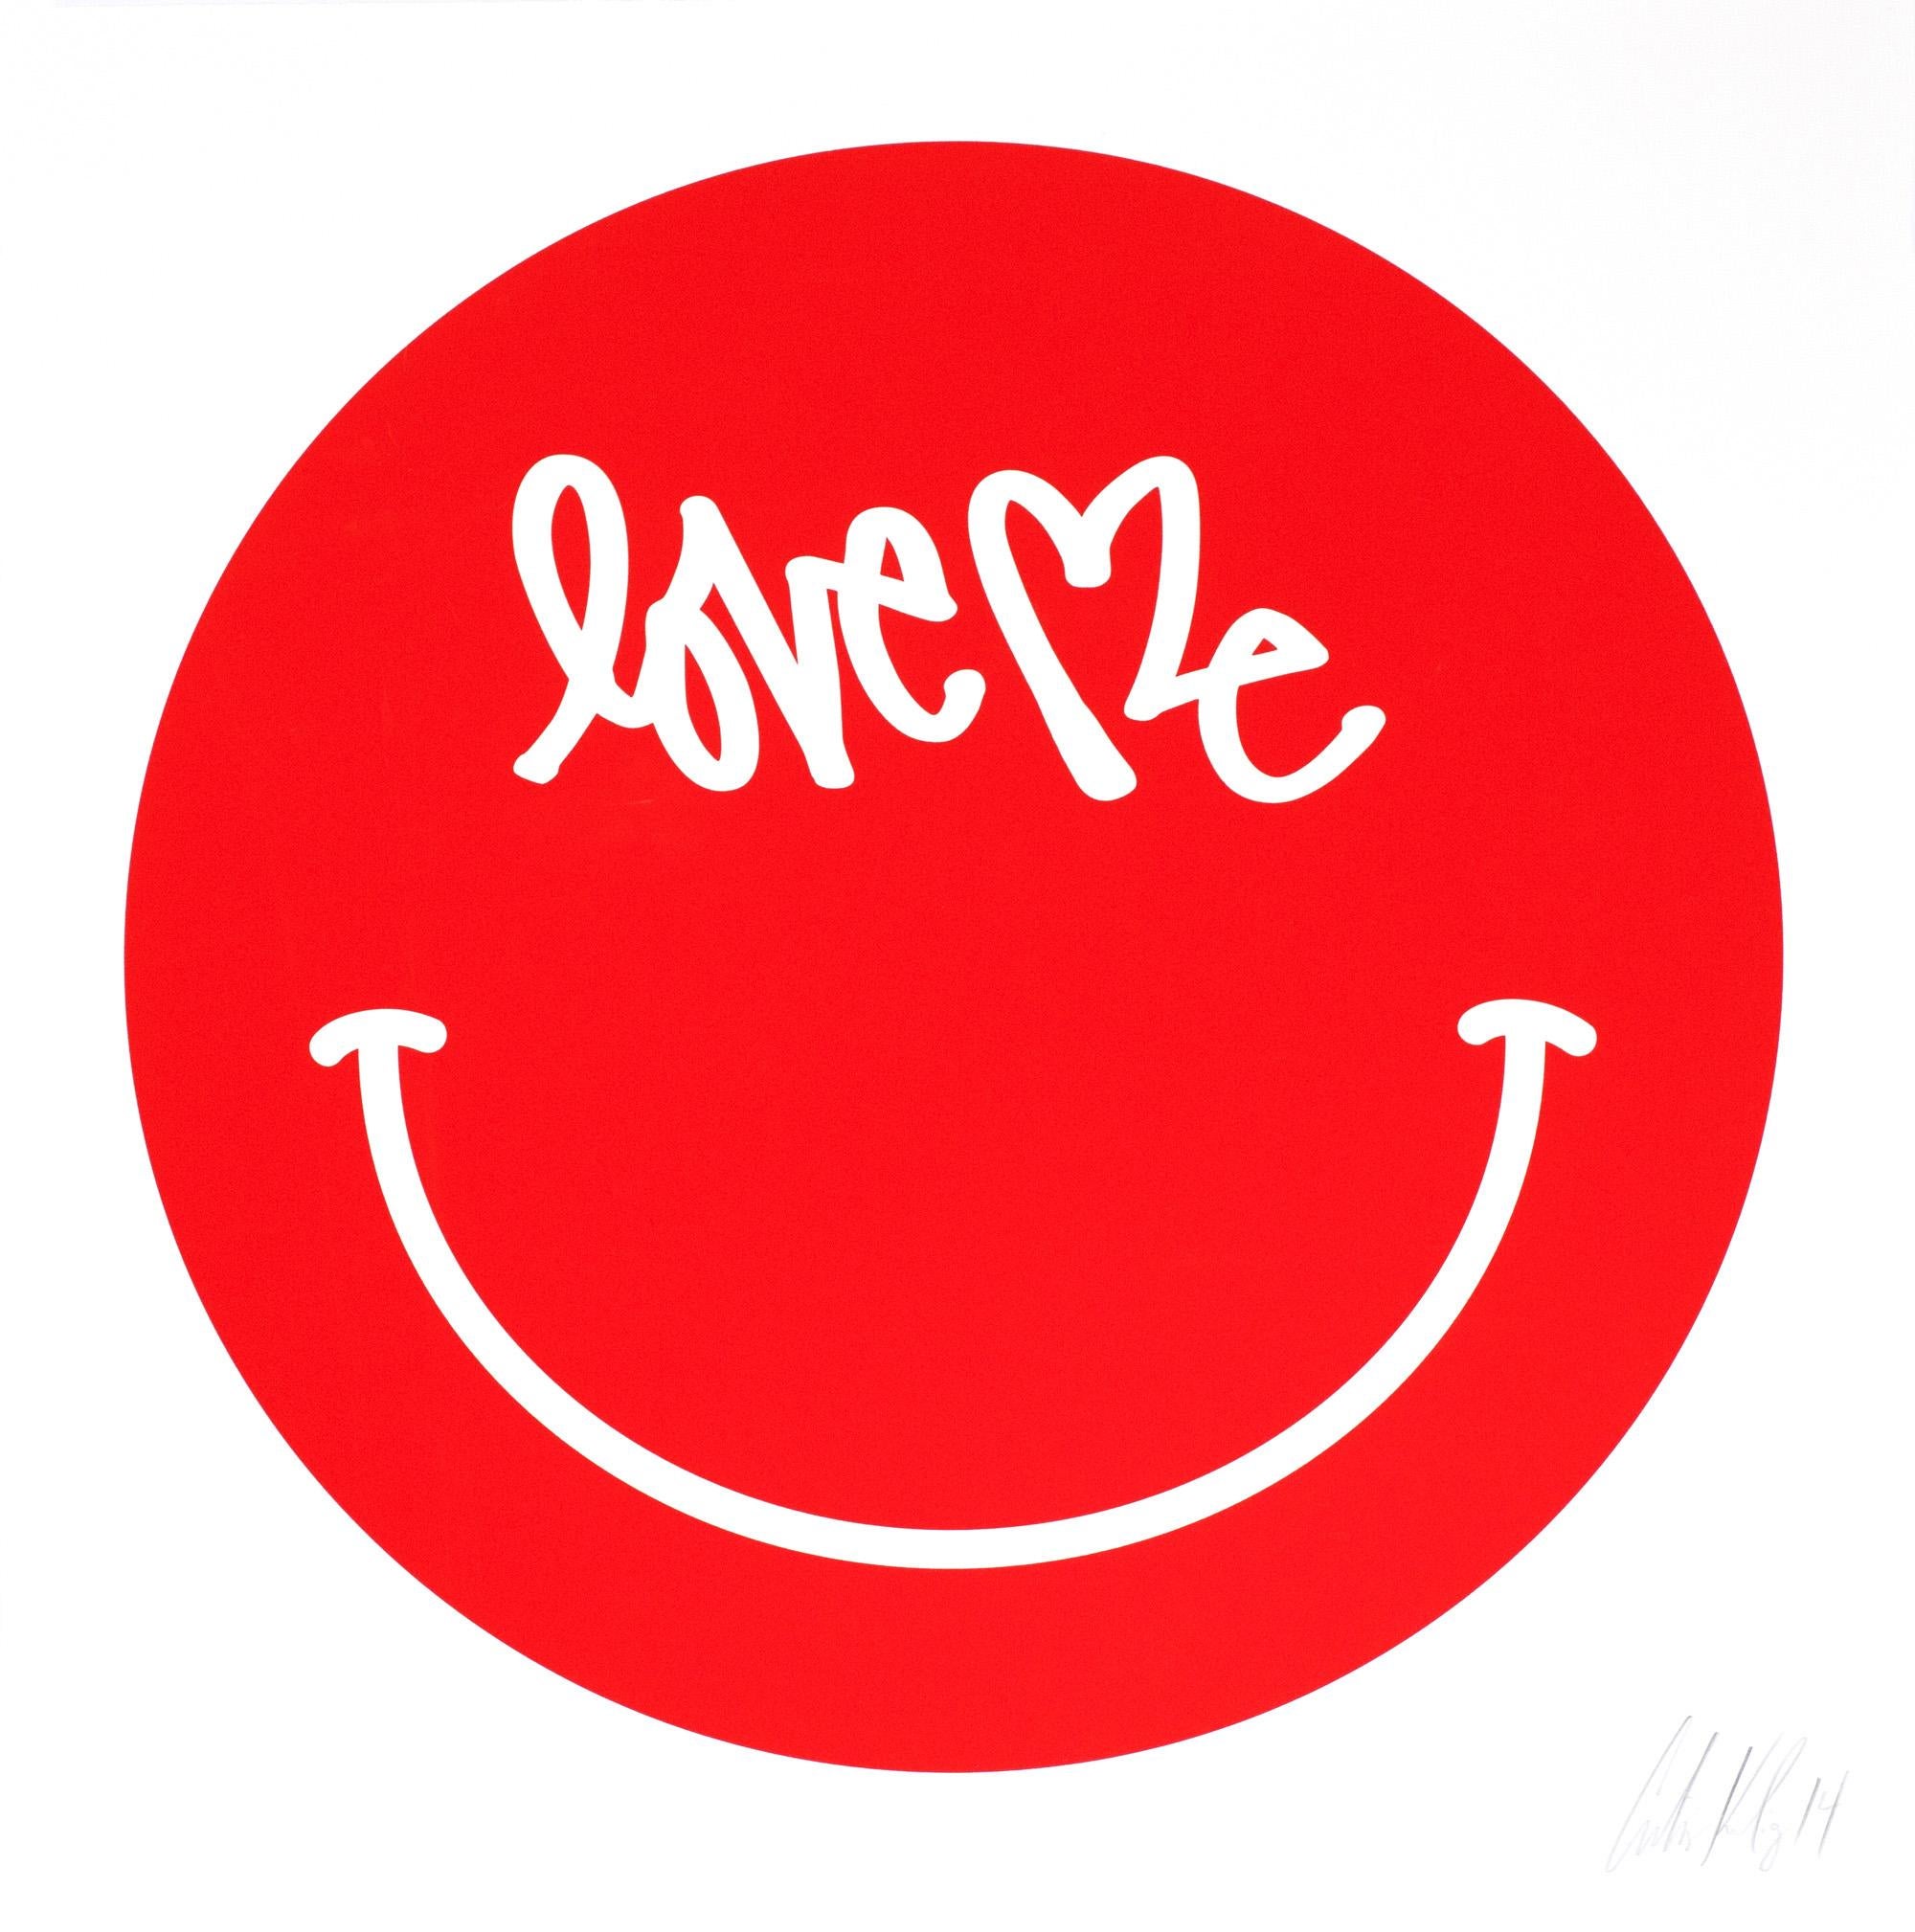 Curtis Kulig Love Me screen-print:
Using a most universal symbol, 'The Smiley', Curtis Kulig replaces the eyes with his world renown "Love Me" signature. At 28 inches square, this hand signed screen-print from a limited edition of 30, is the perfect